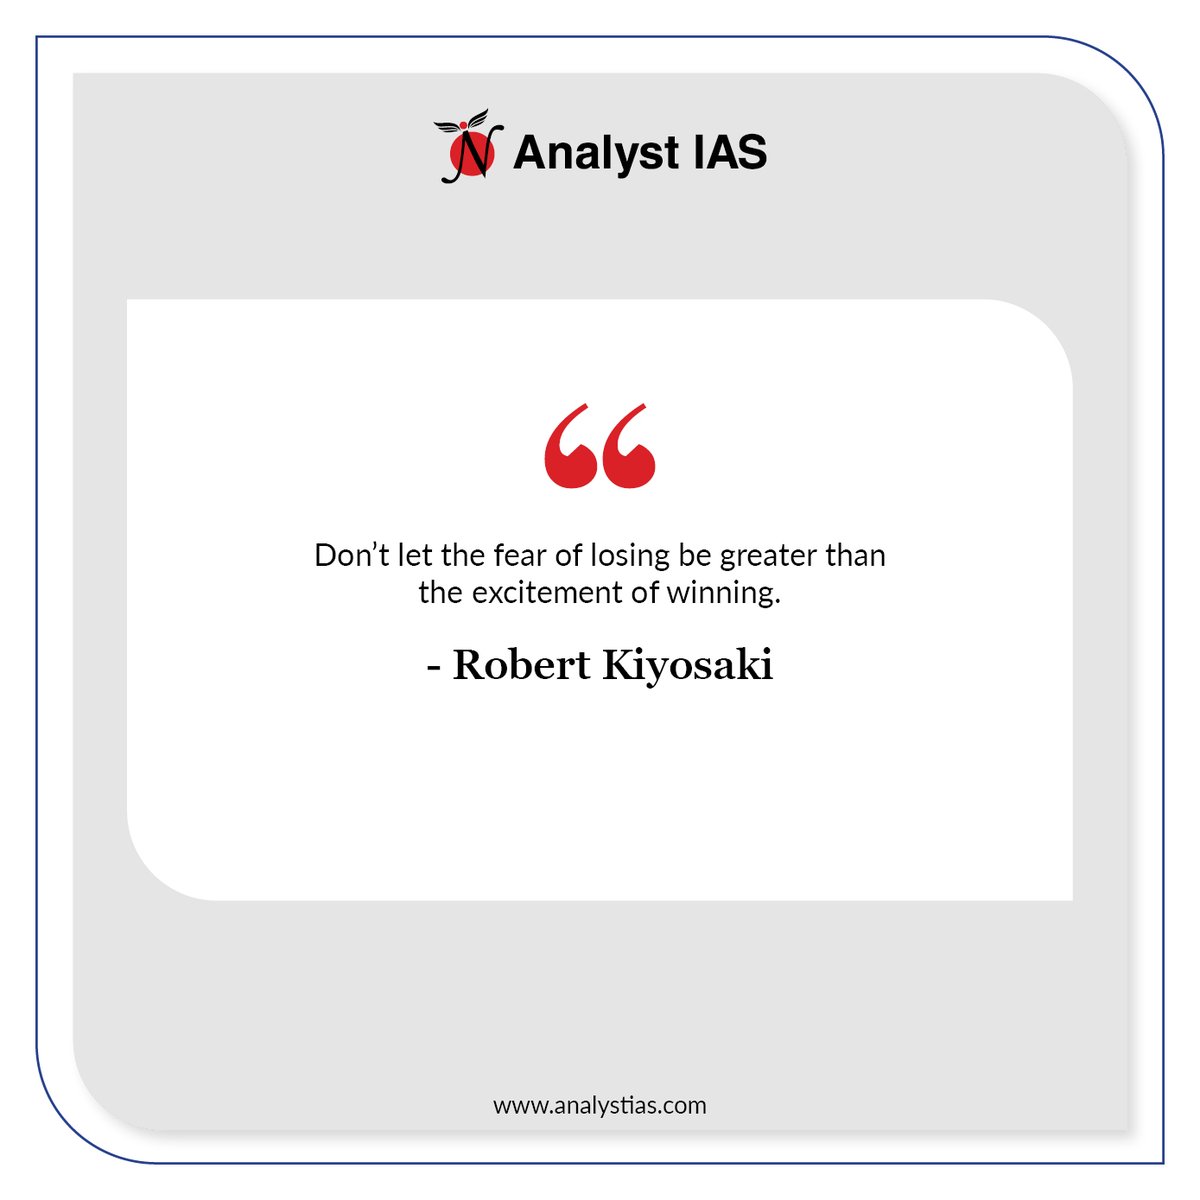 Quote of the day:
Read it. Learn it. Do it.
Watch this space for more updates
.
.
#IAS #quoteoftheday #learning #iasmotivation #iasthought #iasofficer #iasinterview #iasaspirant #iasdreams #AnalystIAS